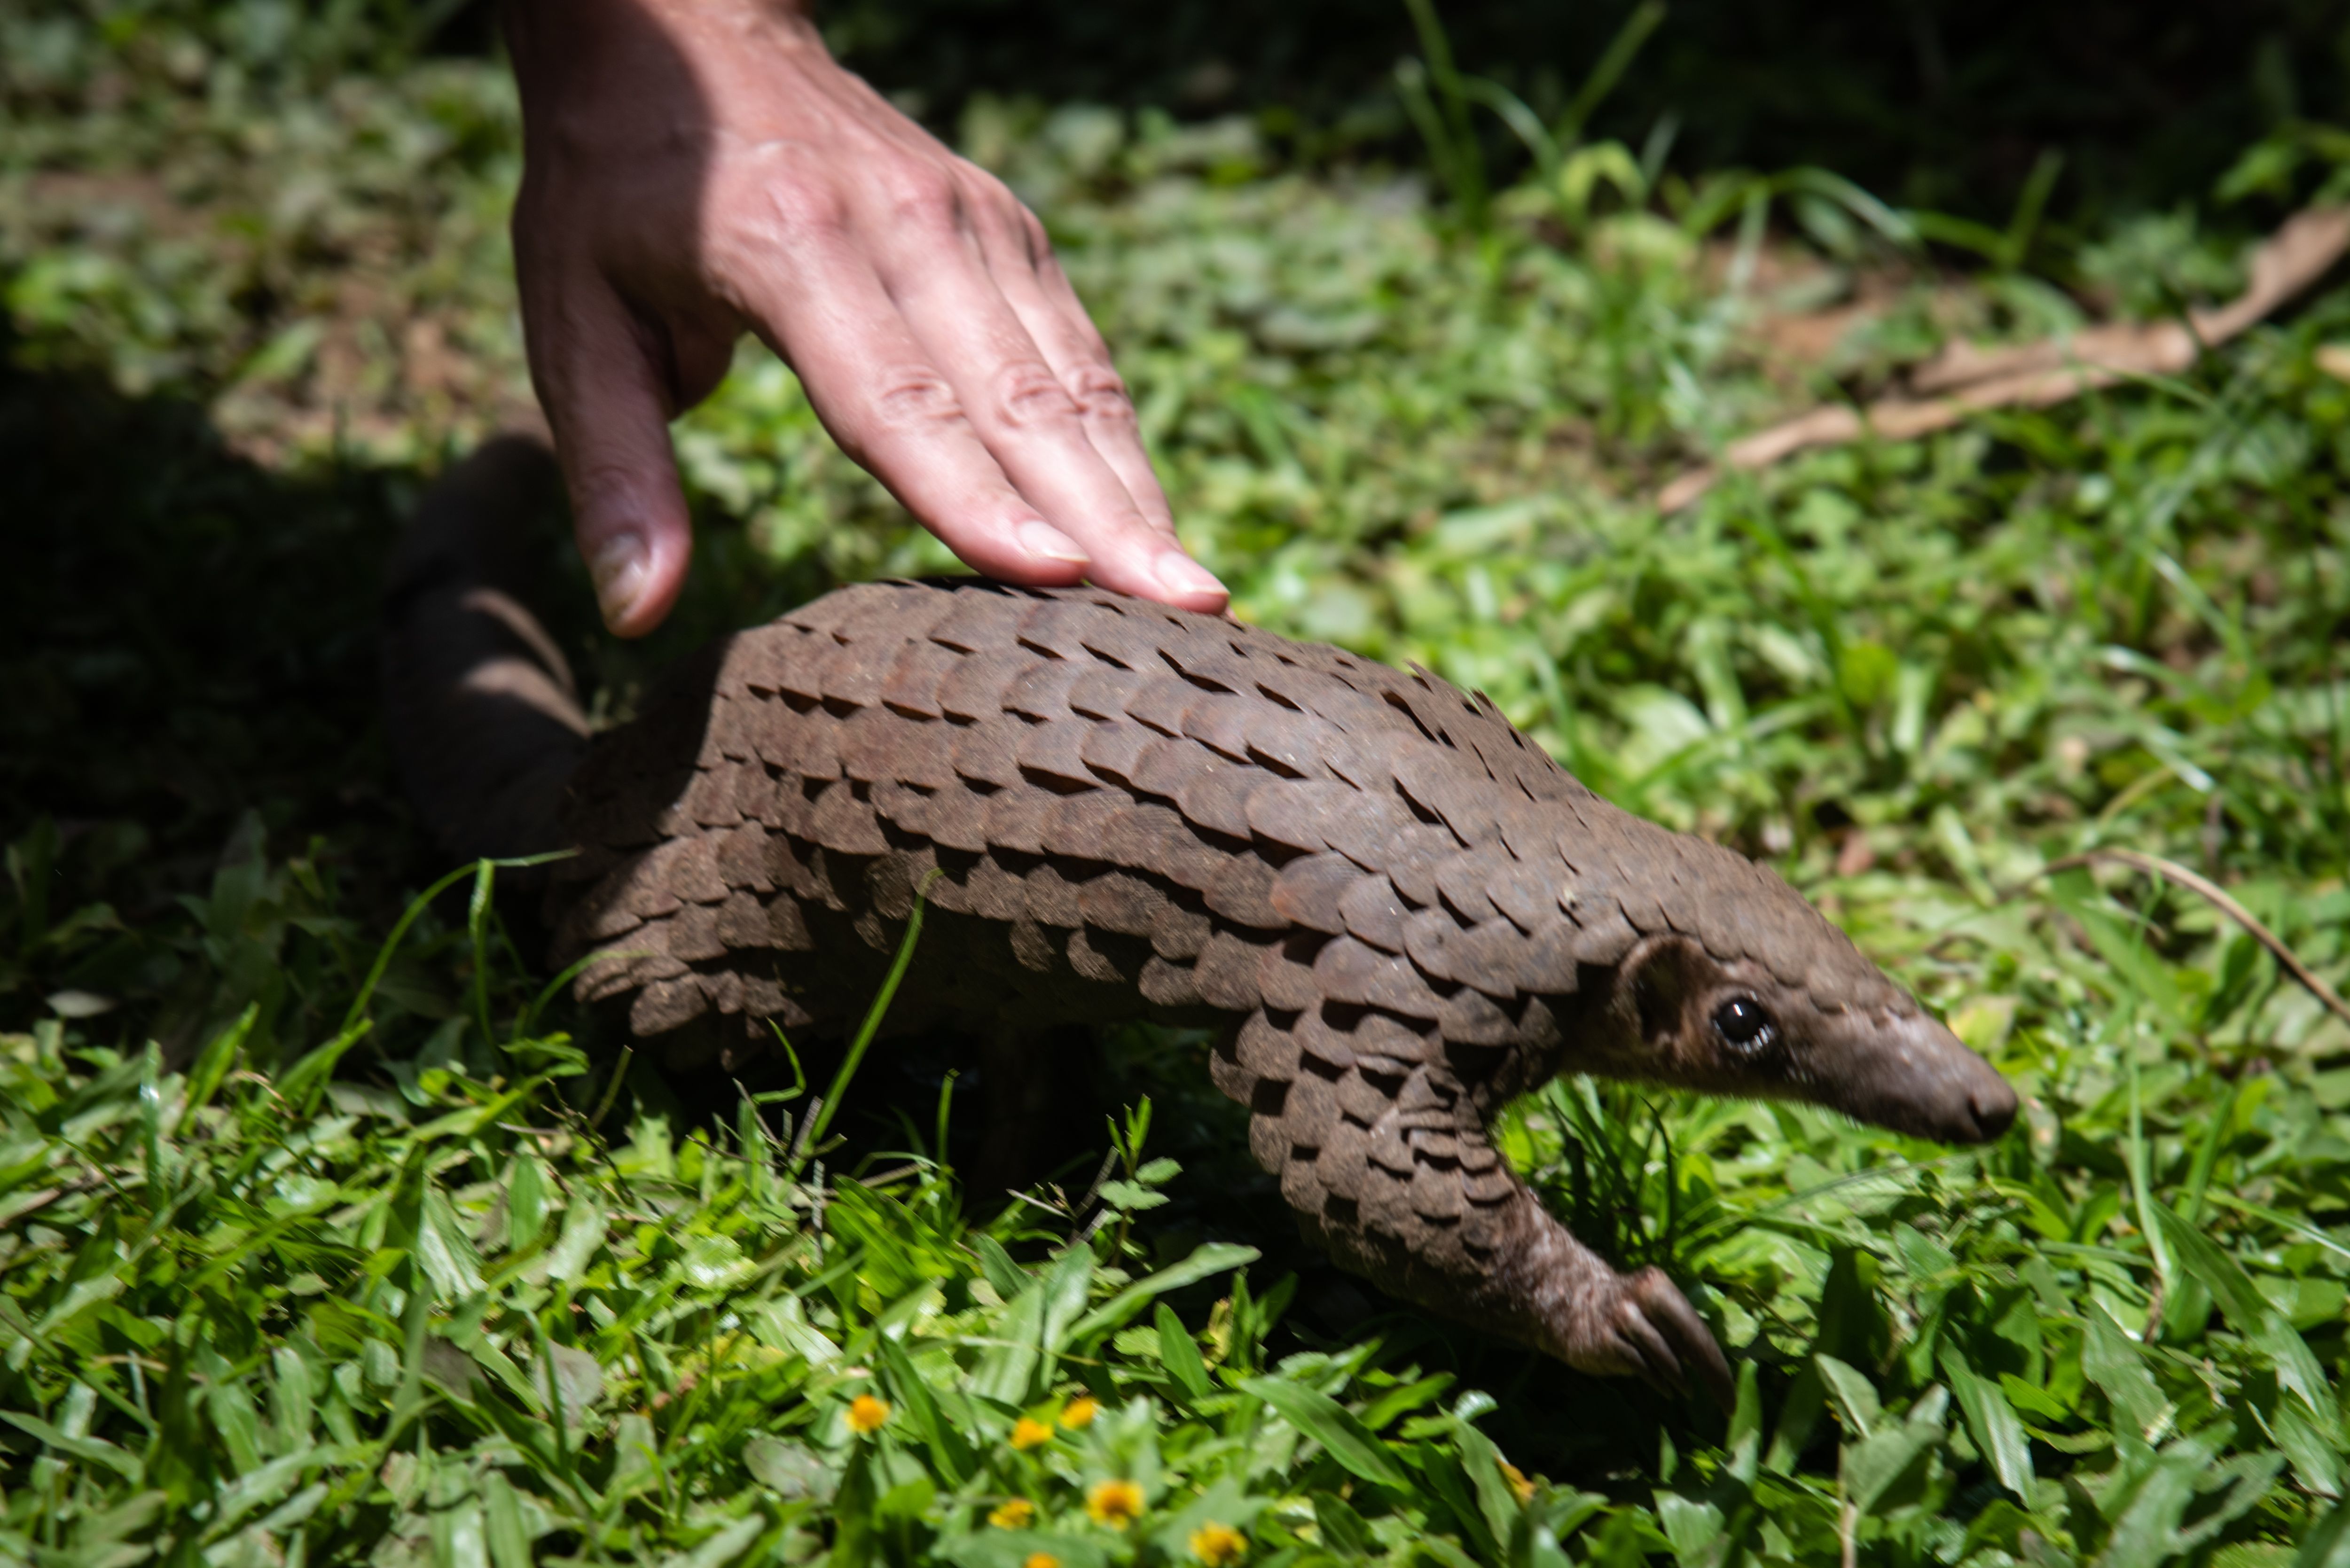 This white-bellied pangolin was rescued from animal traffickers.